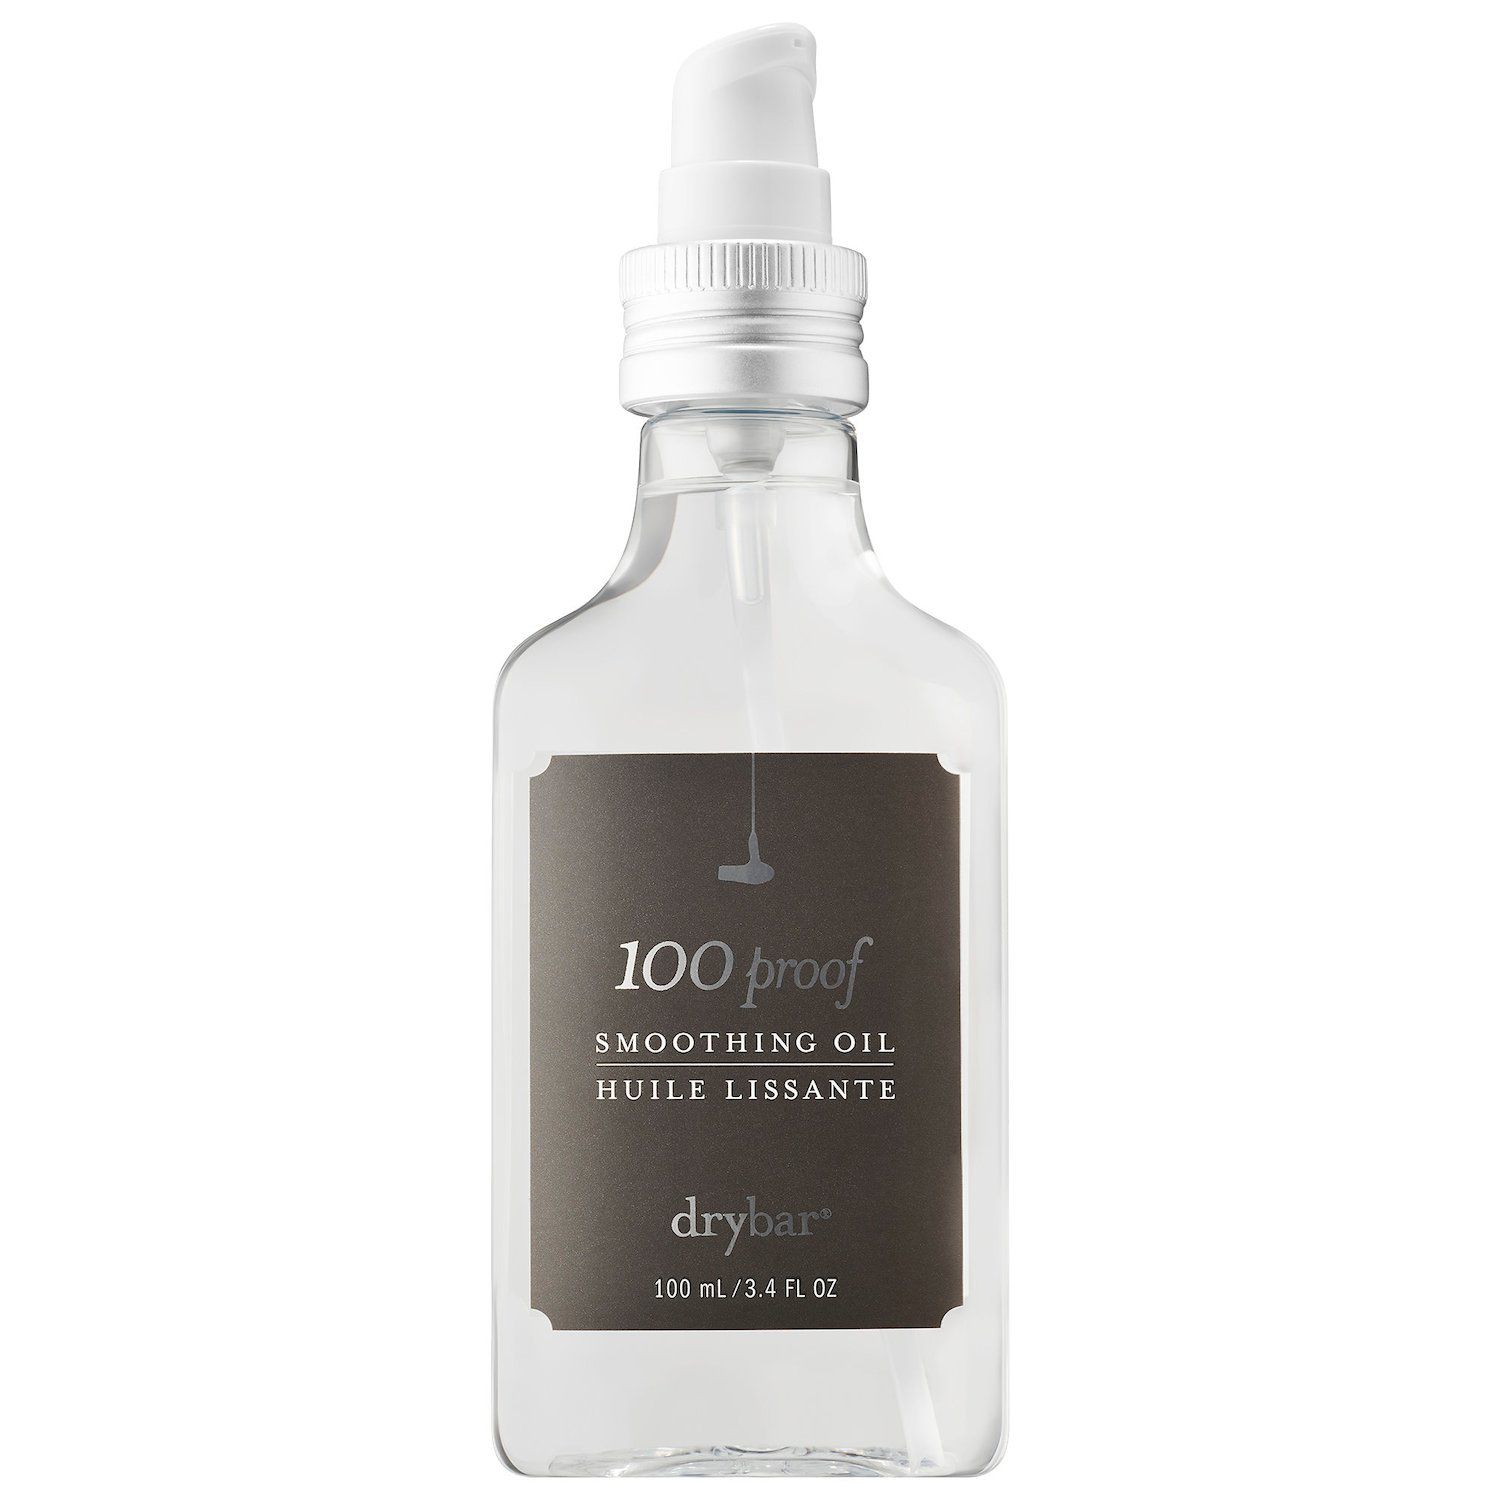 Image for Drybar 100 Proof Smoothing Oil at Kohl's.